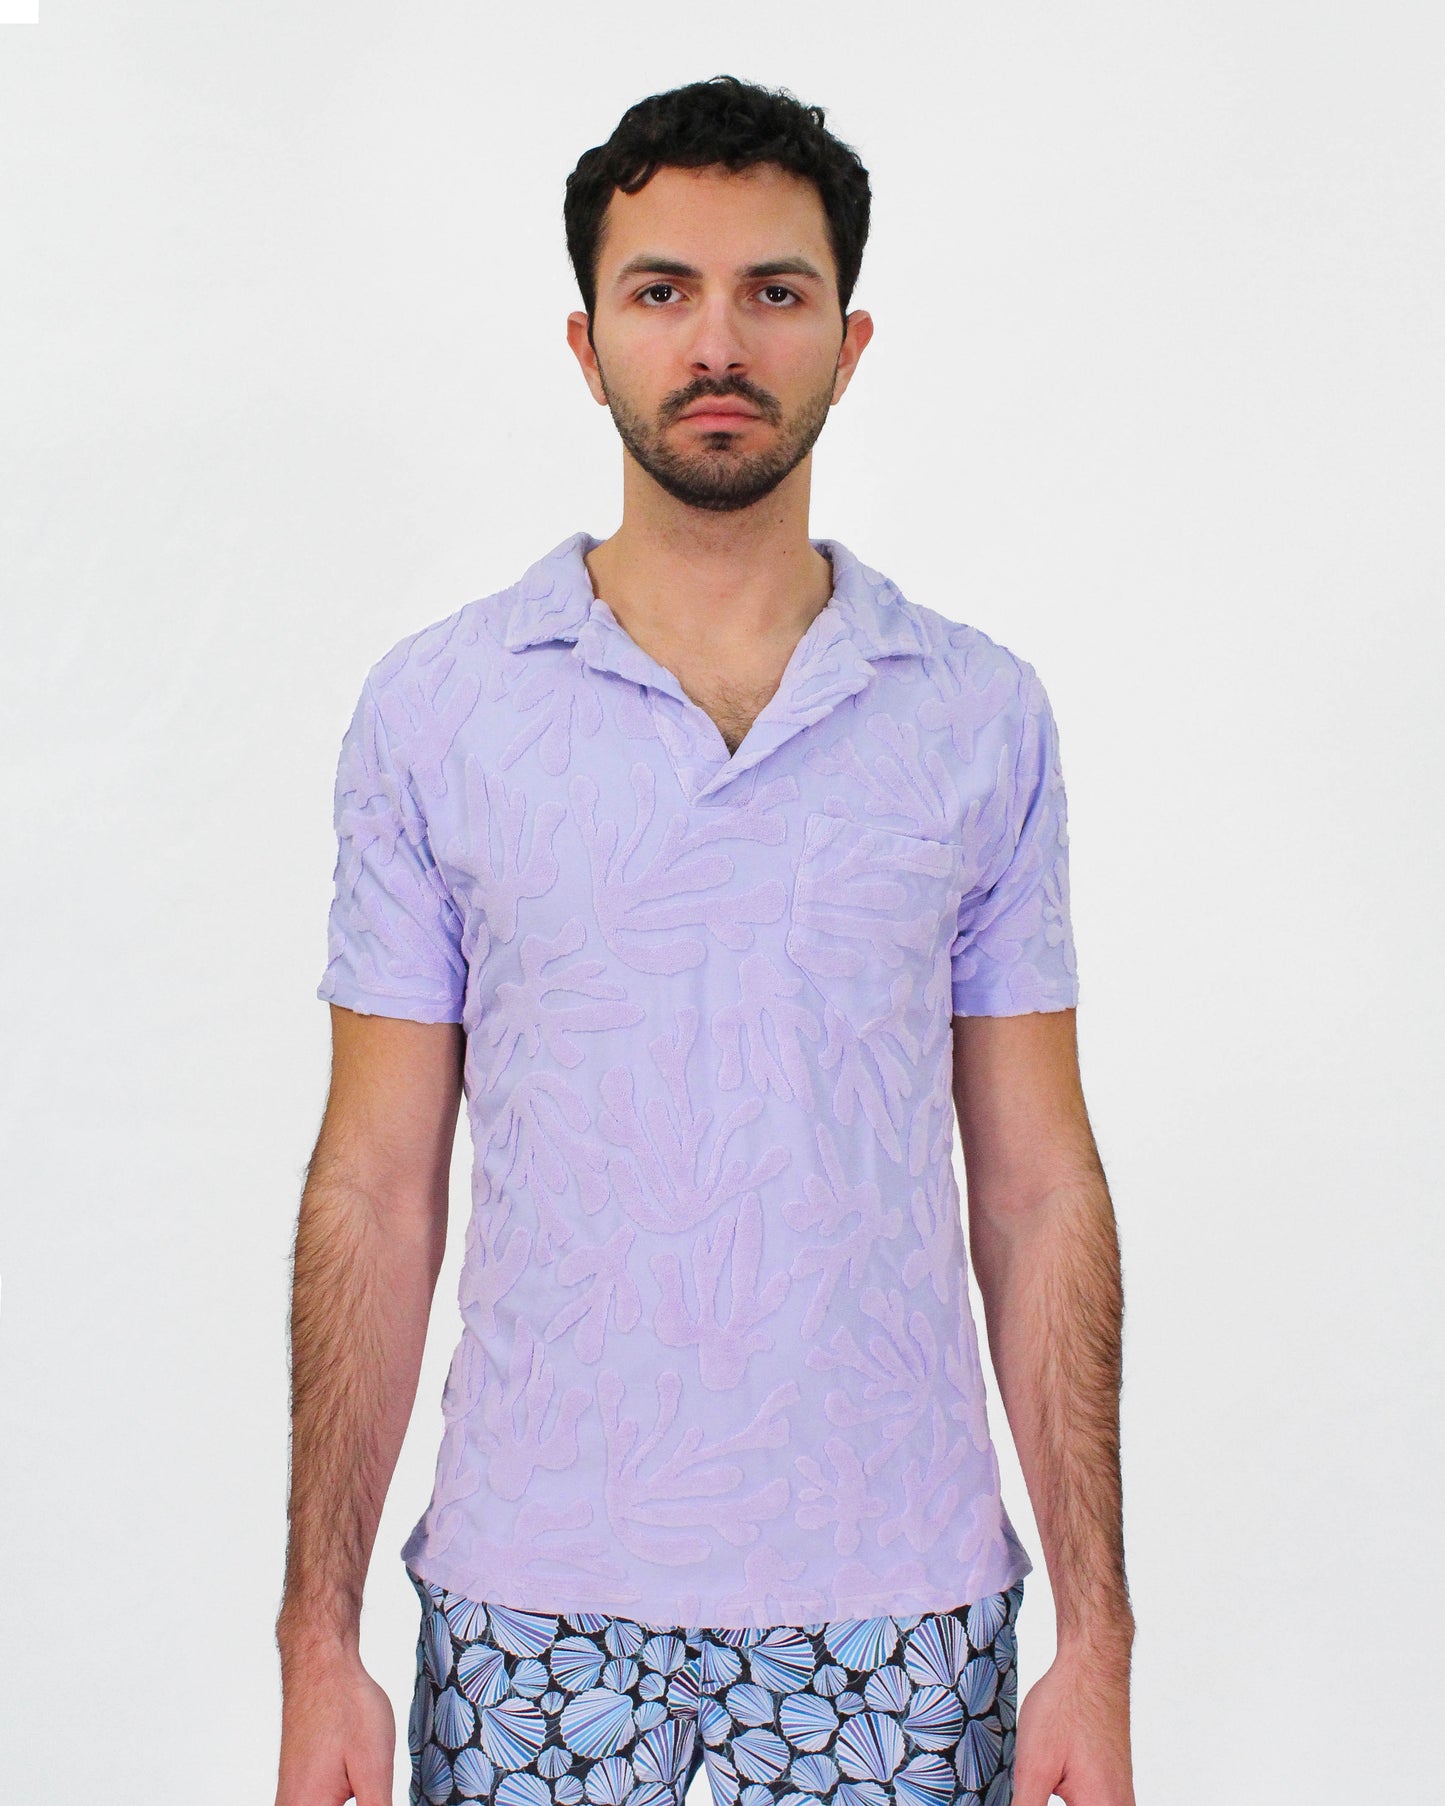 JOHNNY CORAL TOWEL POLO SHIRT IN LAVENDER